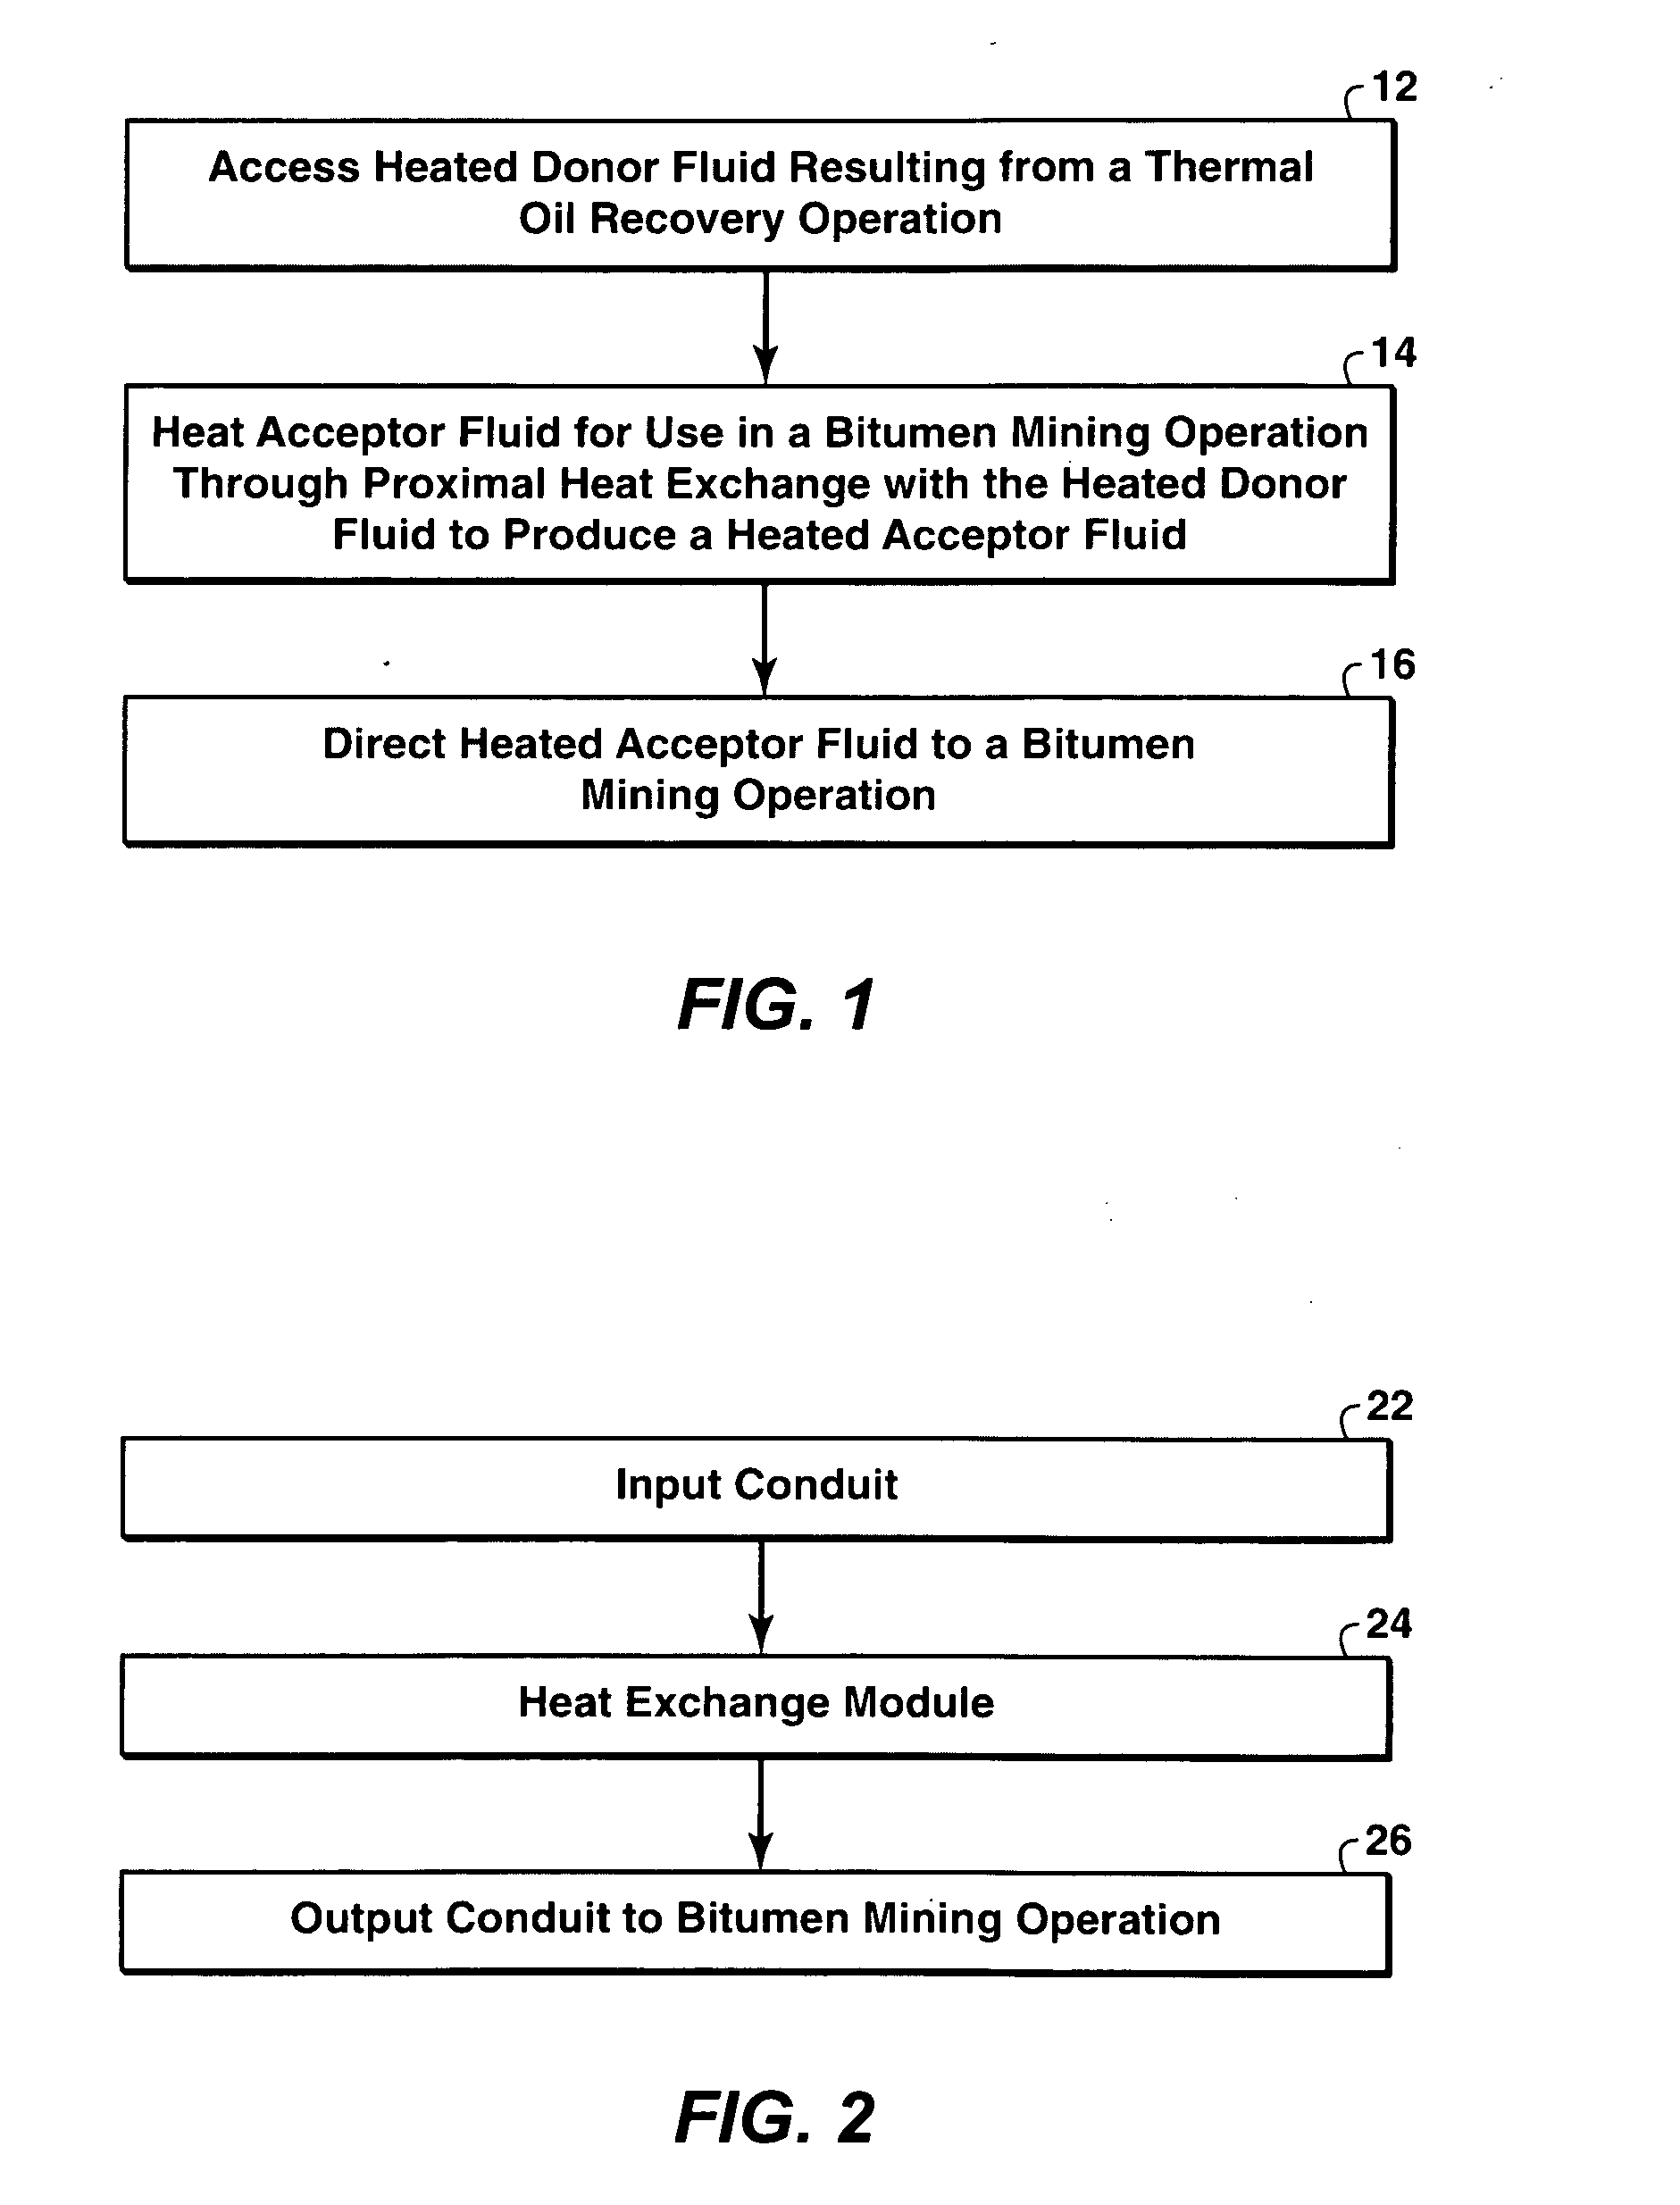 Method and System Integrating Thermal Oil Recovery And Bitumen Mining For Thermal Efficiency